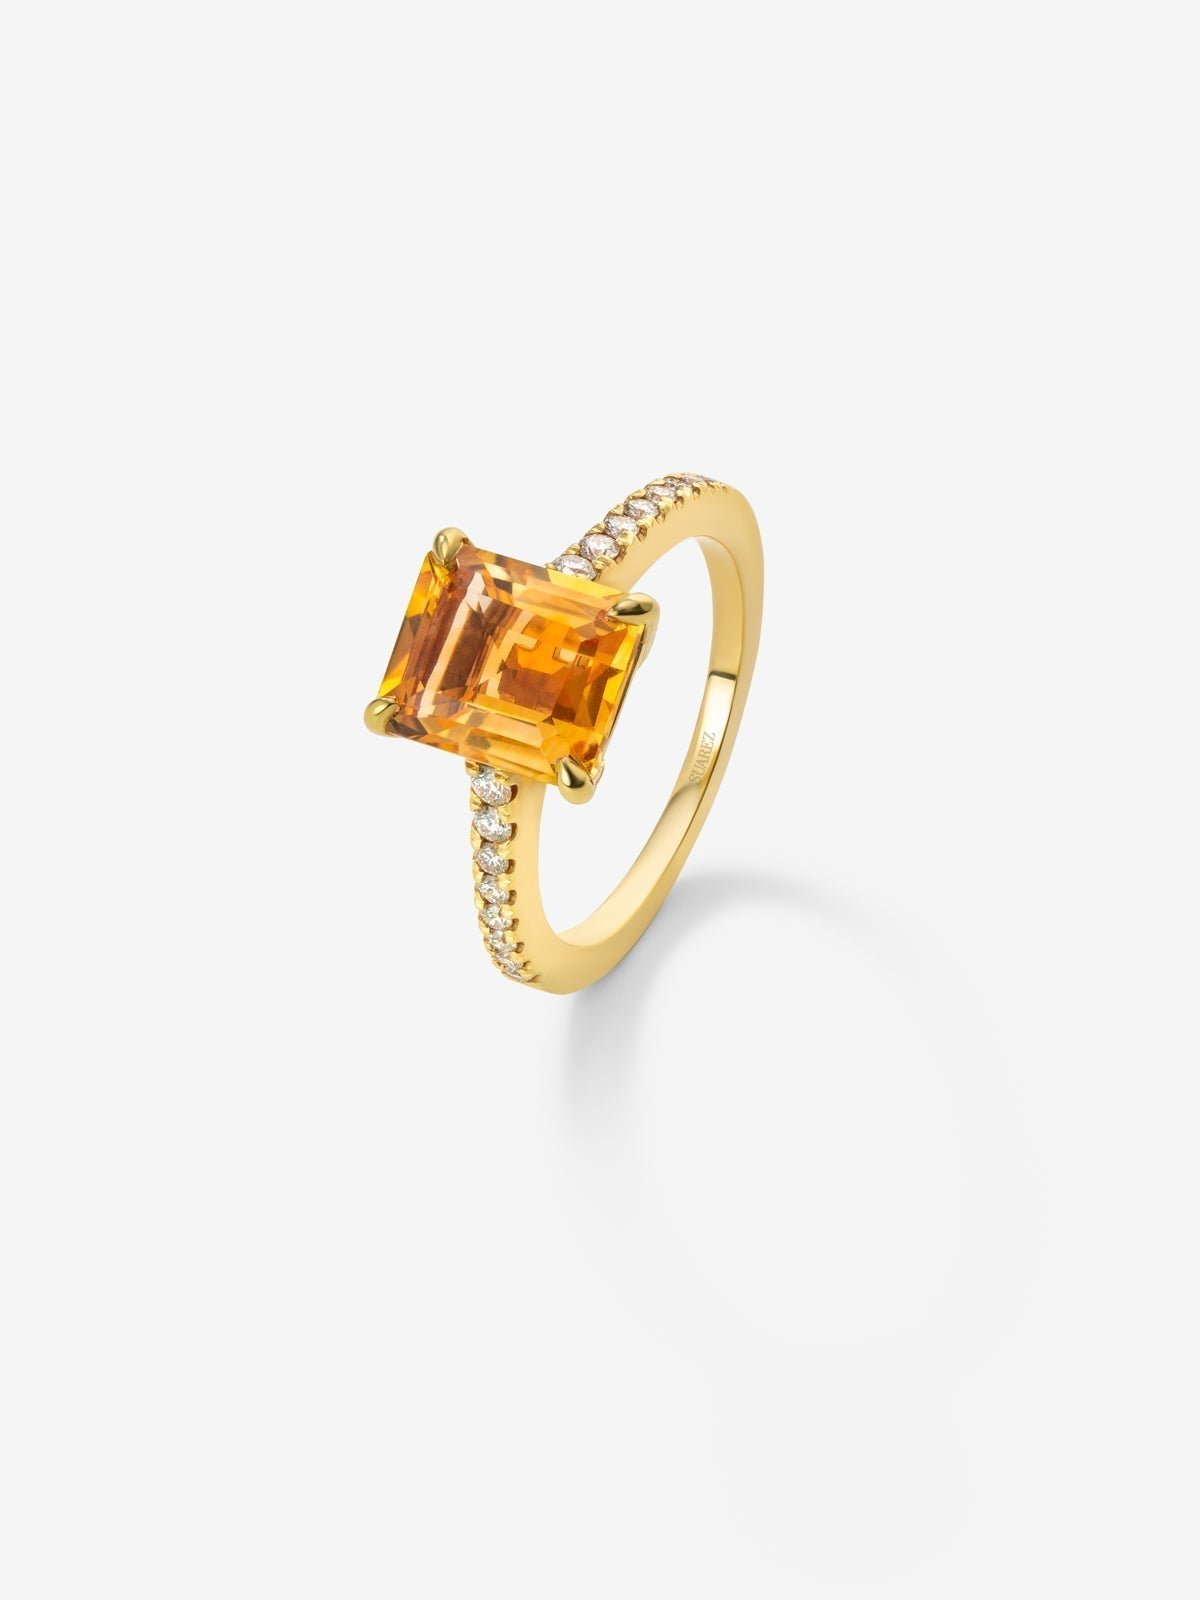 18K yellow gold ring with emerald-cut citrine quartz of 2.86 cts and 16 brilliant-cut diamonds with a total of 0.19 cts